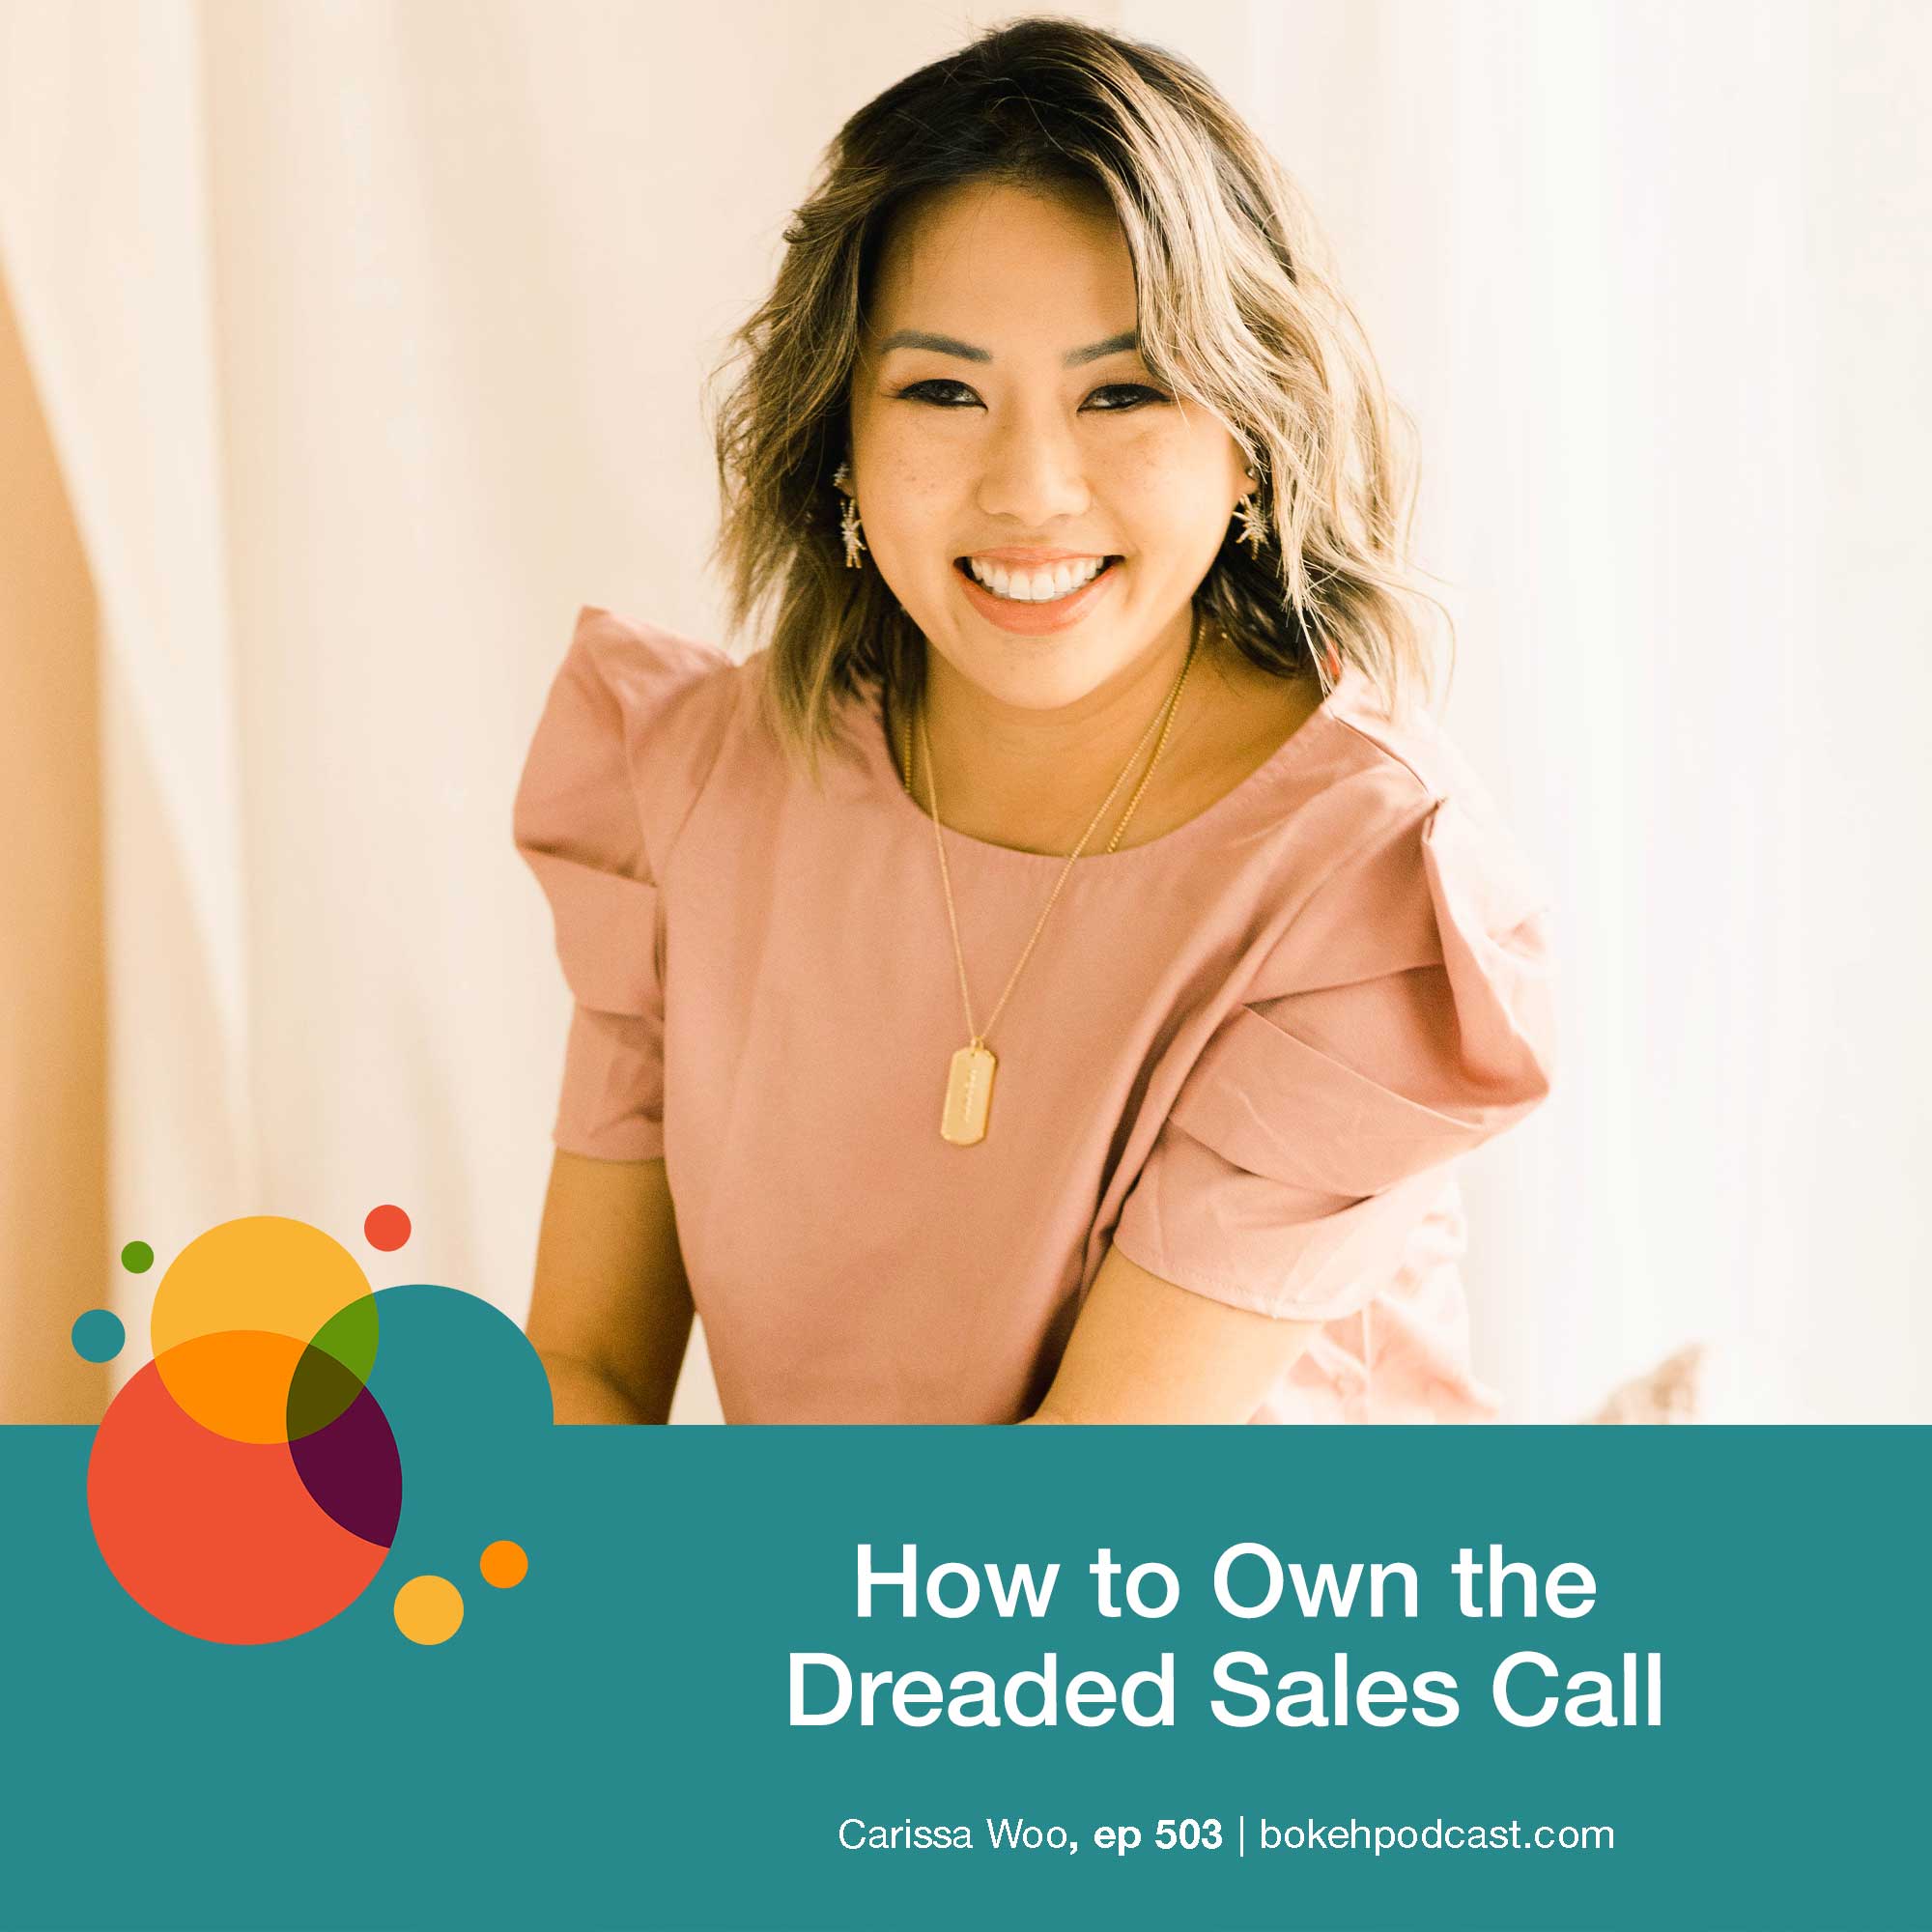 How to Own the Dreaded Sales Call - Carissa Woo